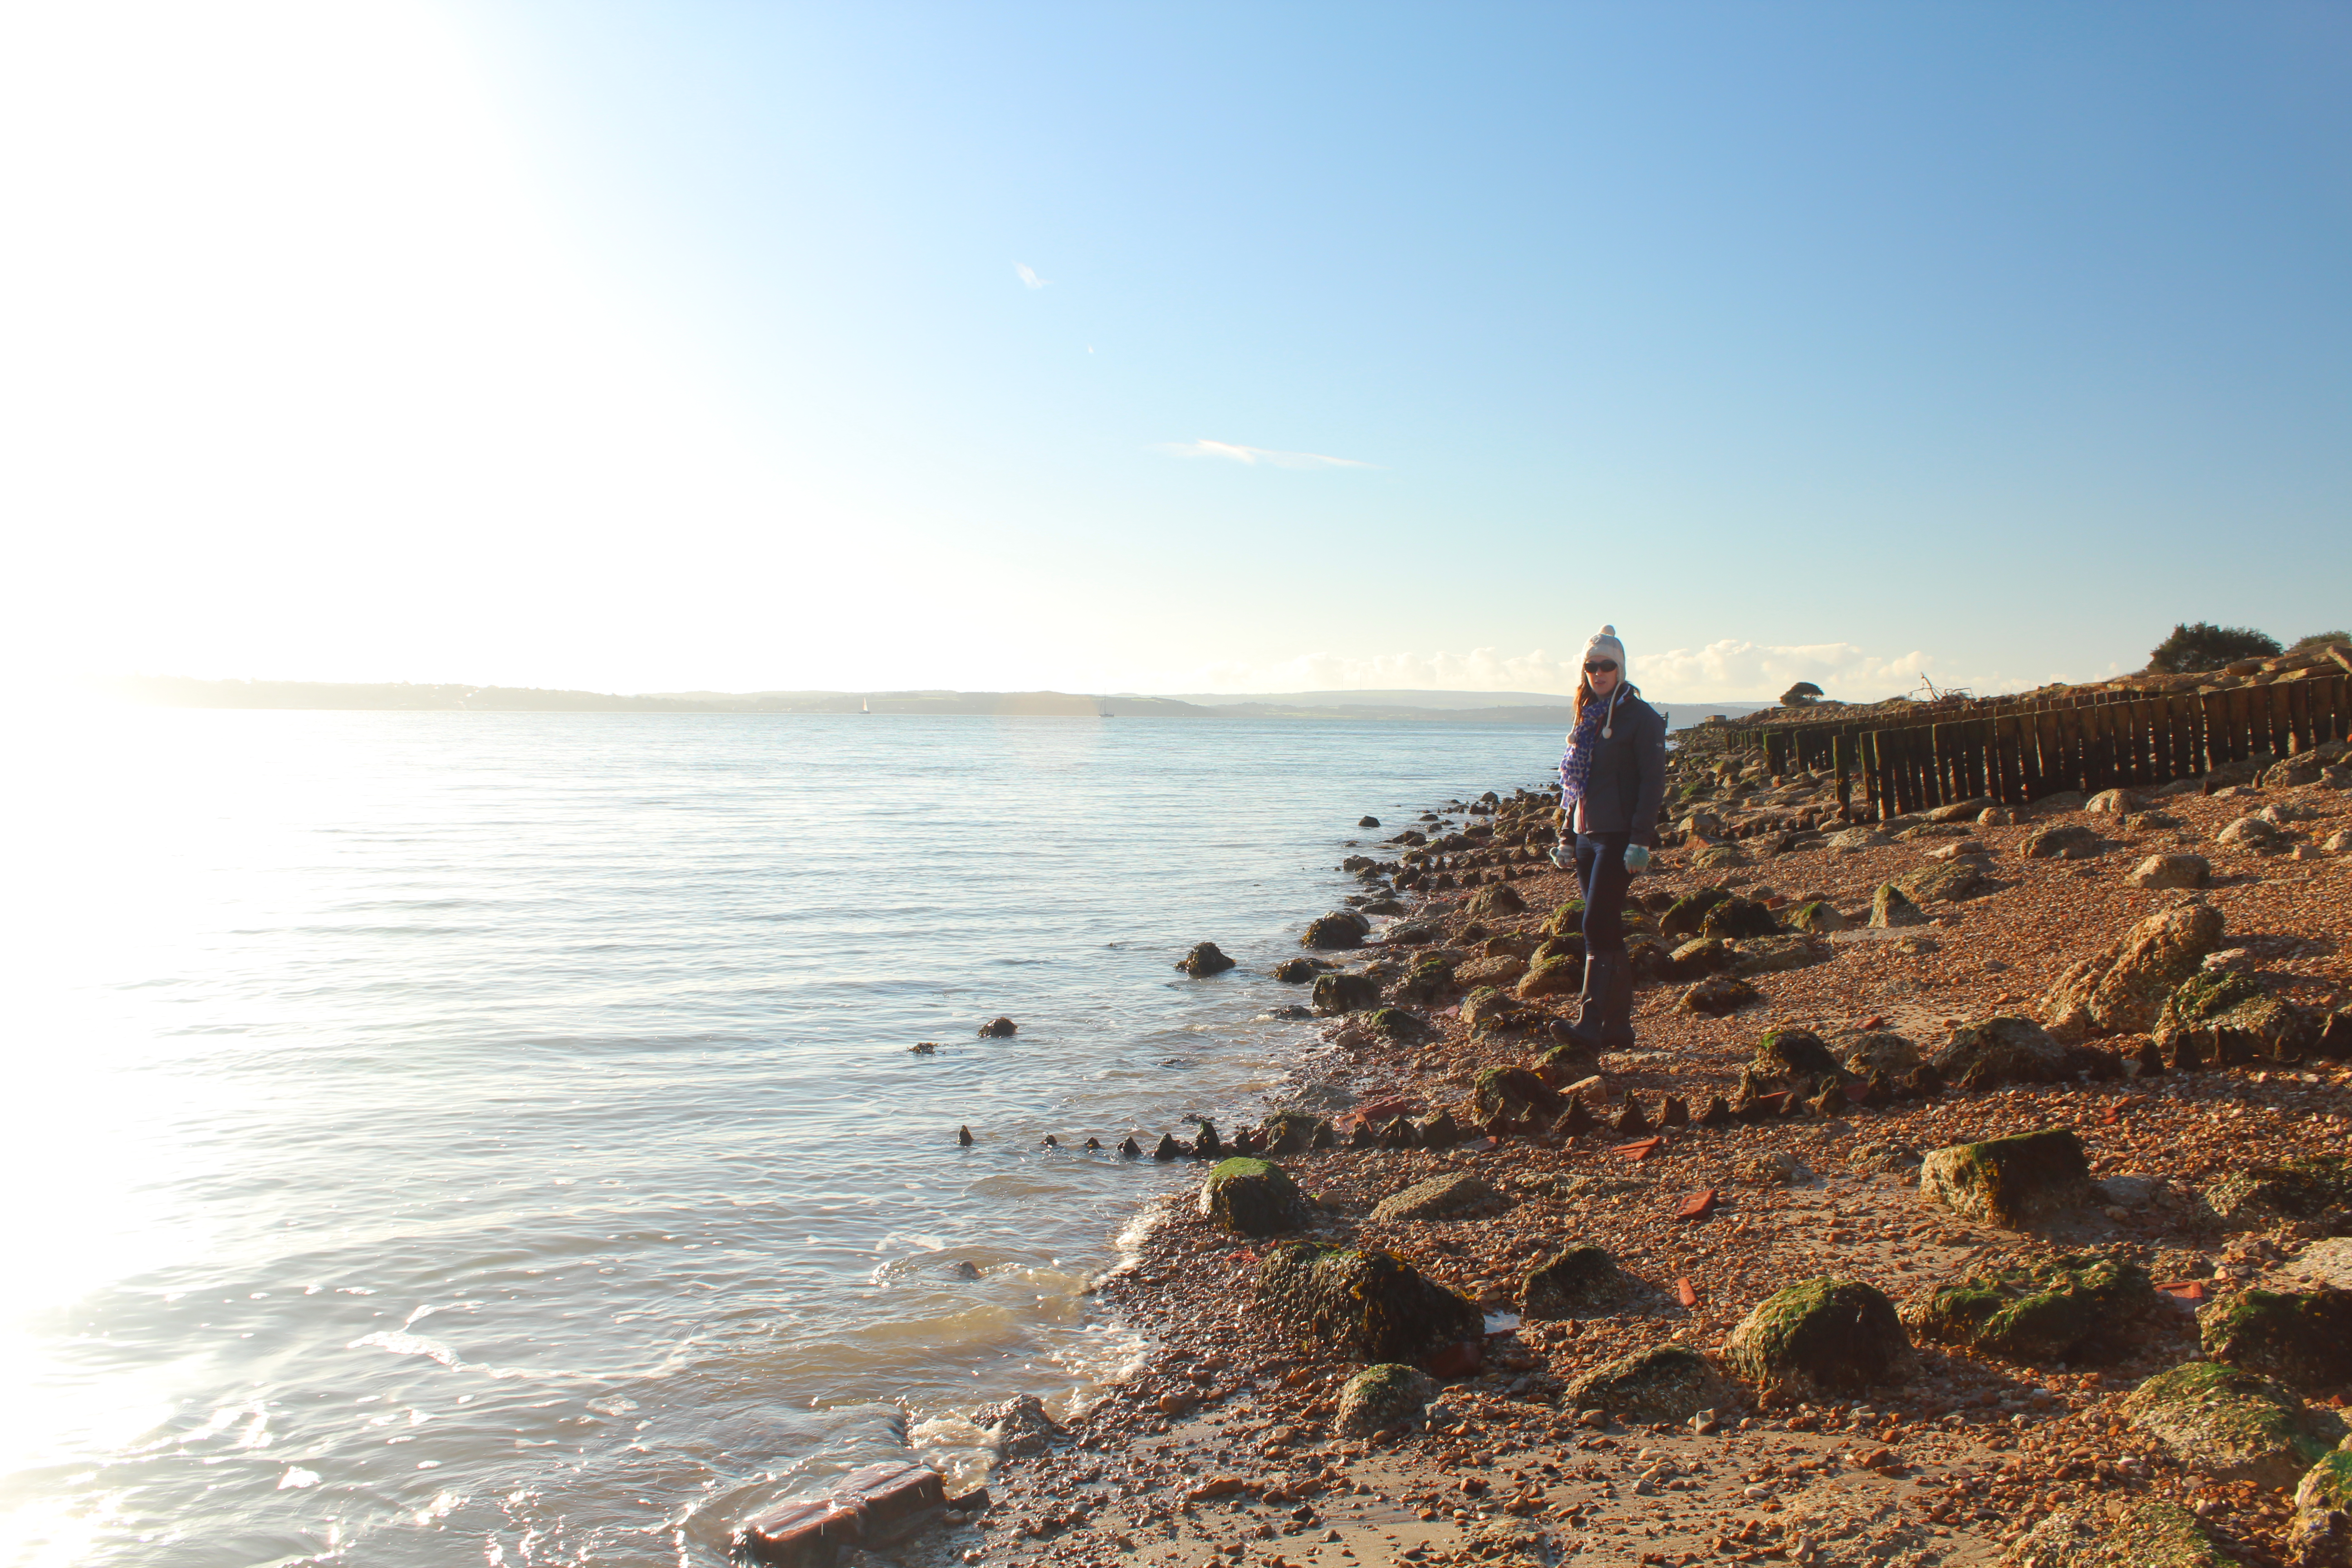 A sunny January morning at Lepe – dodging the #winterblues